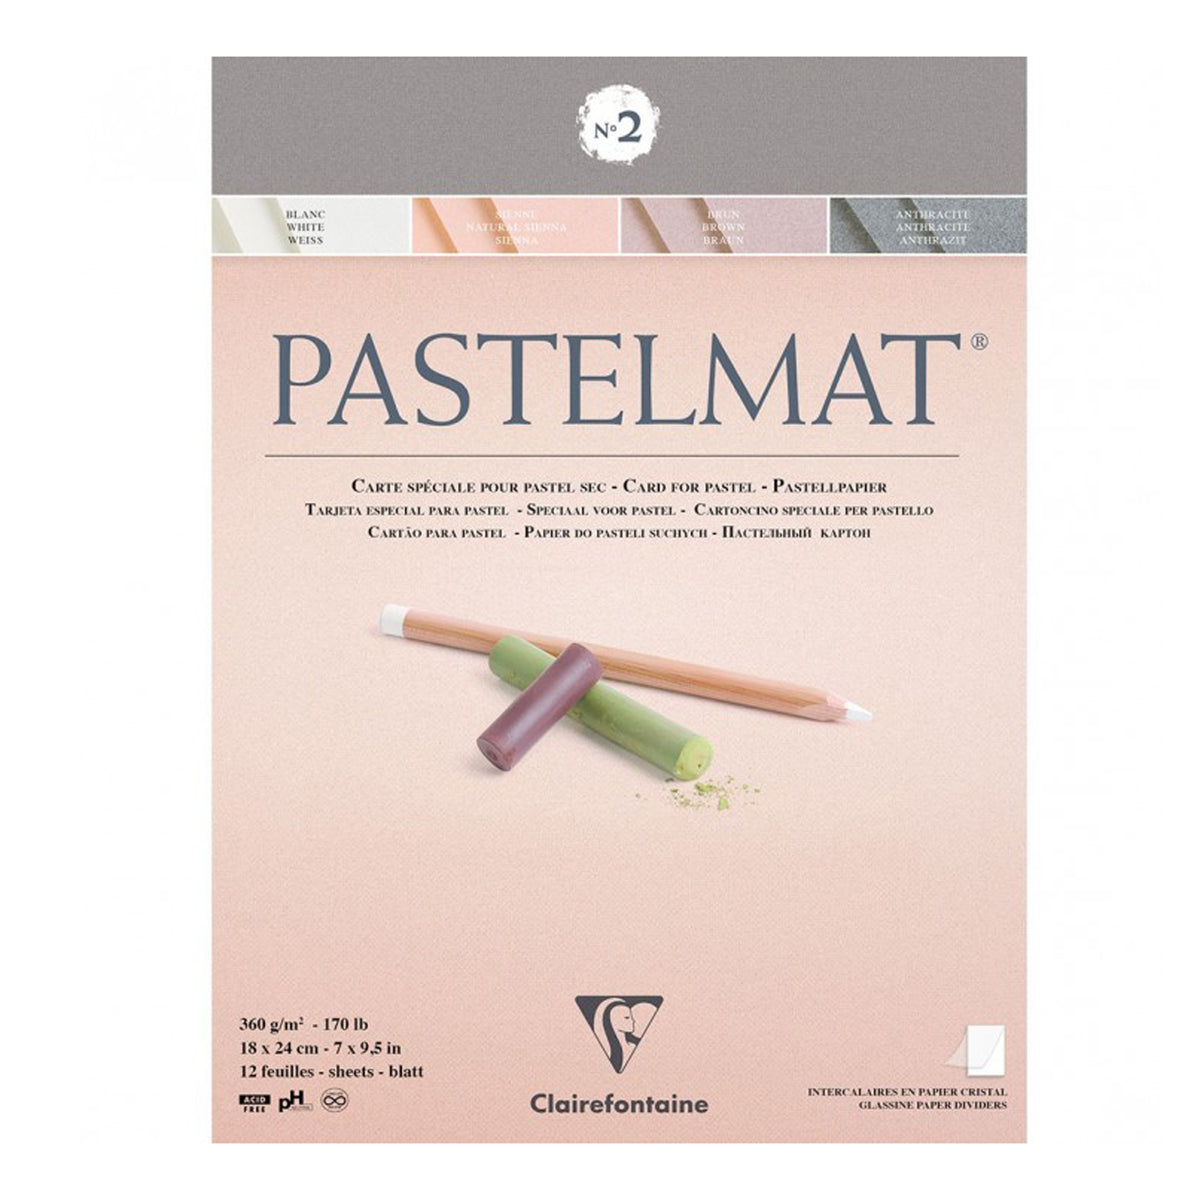 Clairefontaine PASTELMAT Card for Pastel 360gsm - 170Ib - 12 Sheets